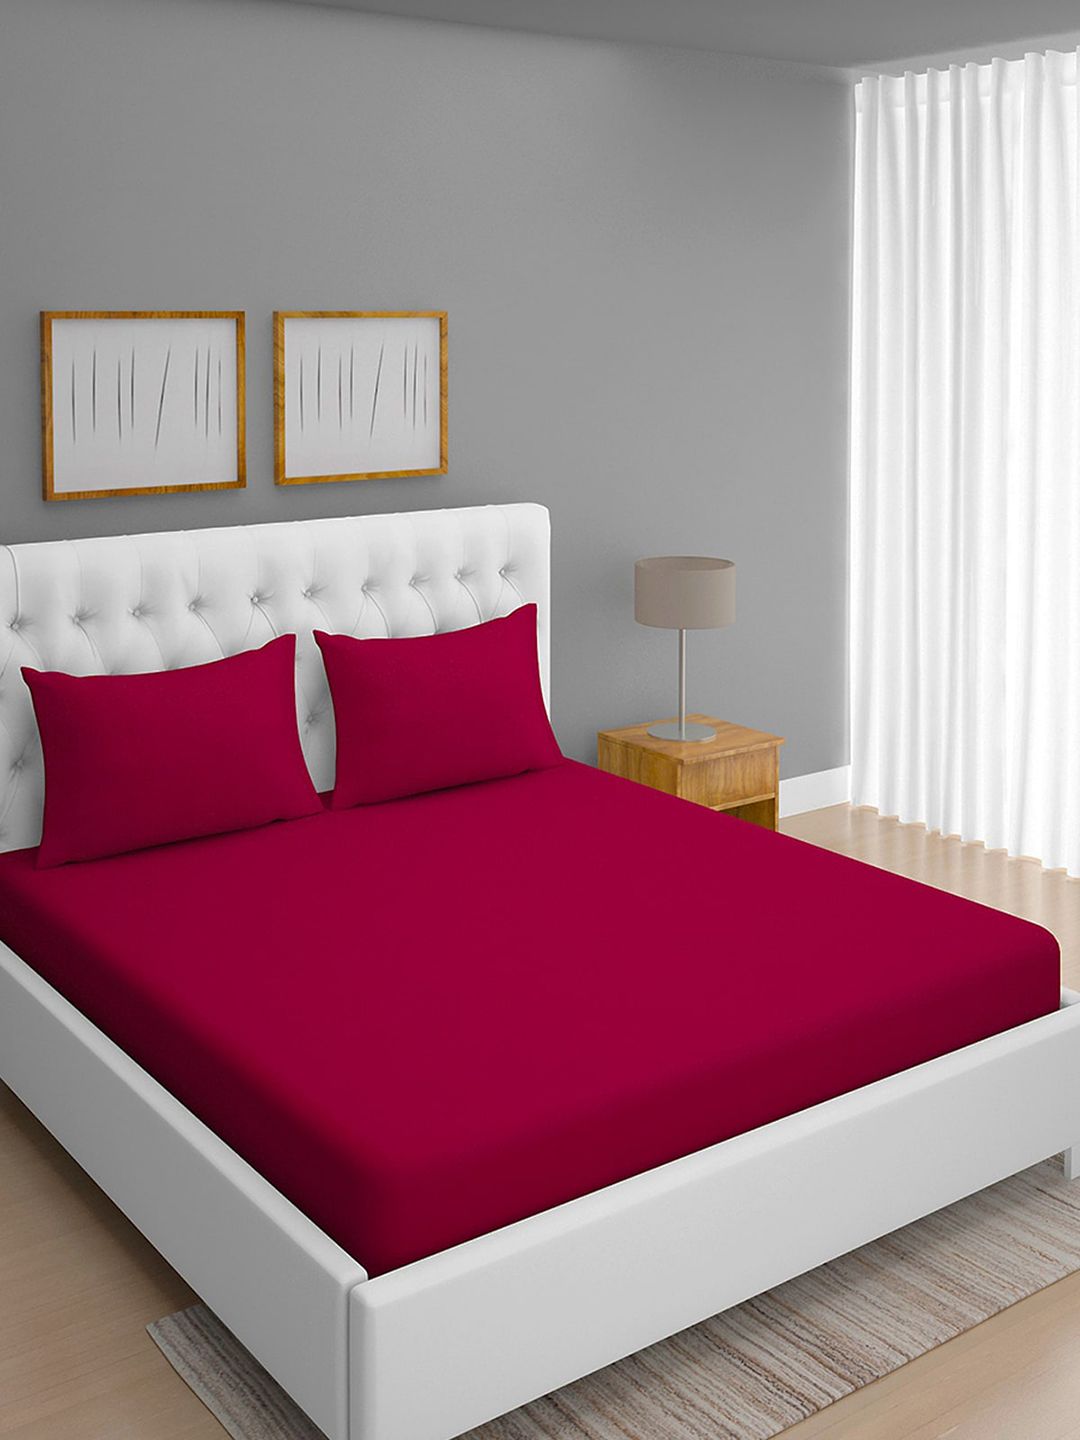 ROMEE Maroon 400 TC King Bedsheet with 2 Pillow Covers Price in India